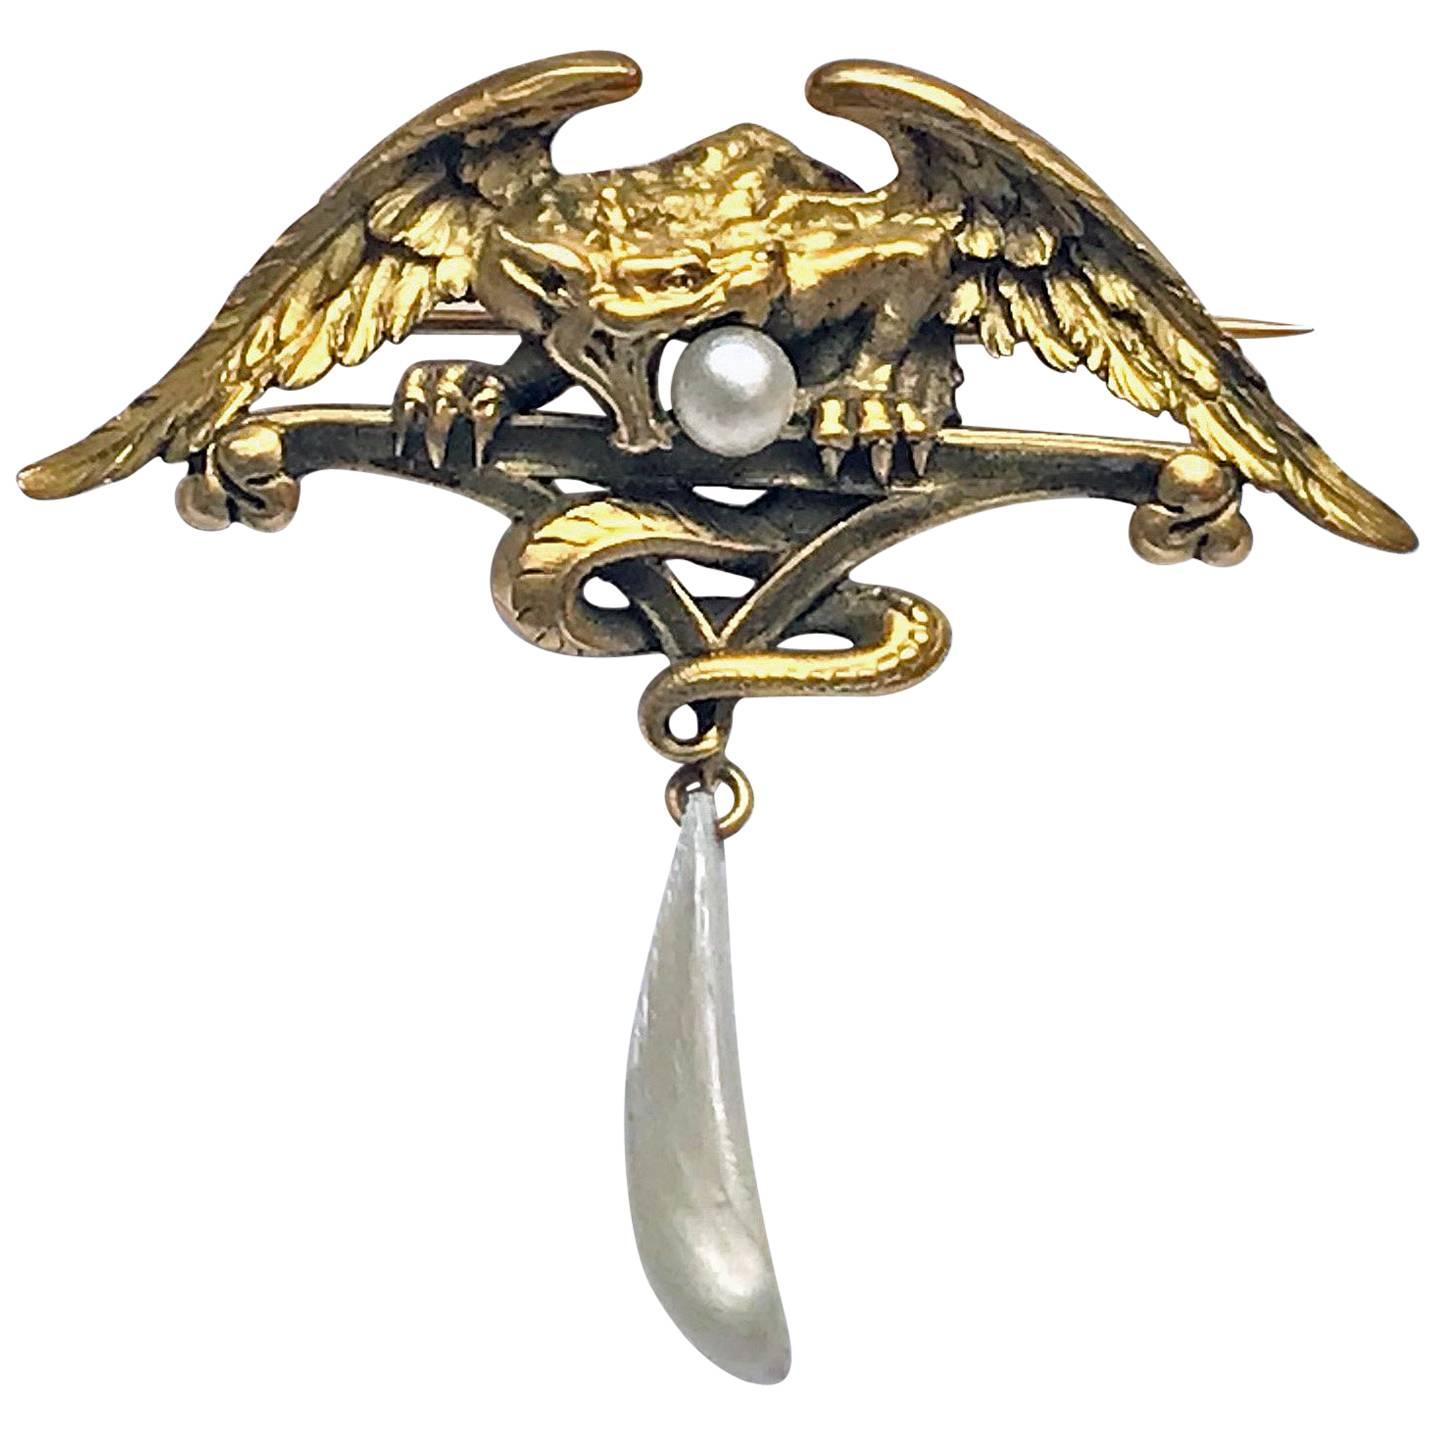 French Art Nouveau 18K mythological brooch Pendant, C.1900. The brooch pendant depicting a mythological combination including part eagle, part serpent griffin carrying a pearl in mouth and suspending a mother of pearl. Width (wing spread): 2.25